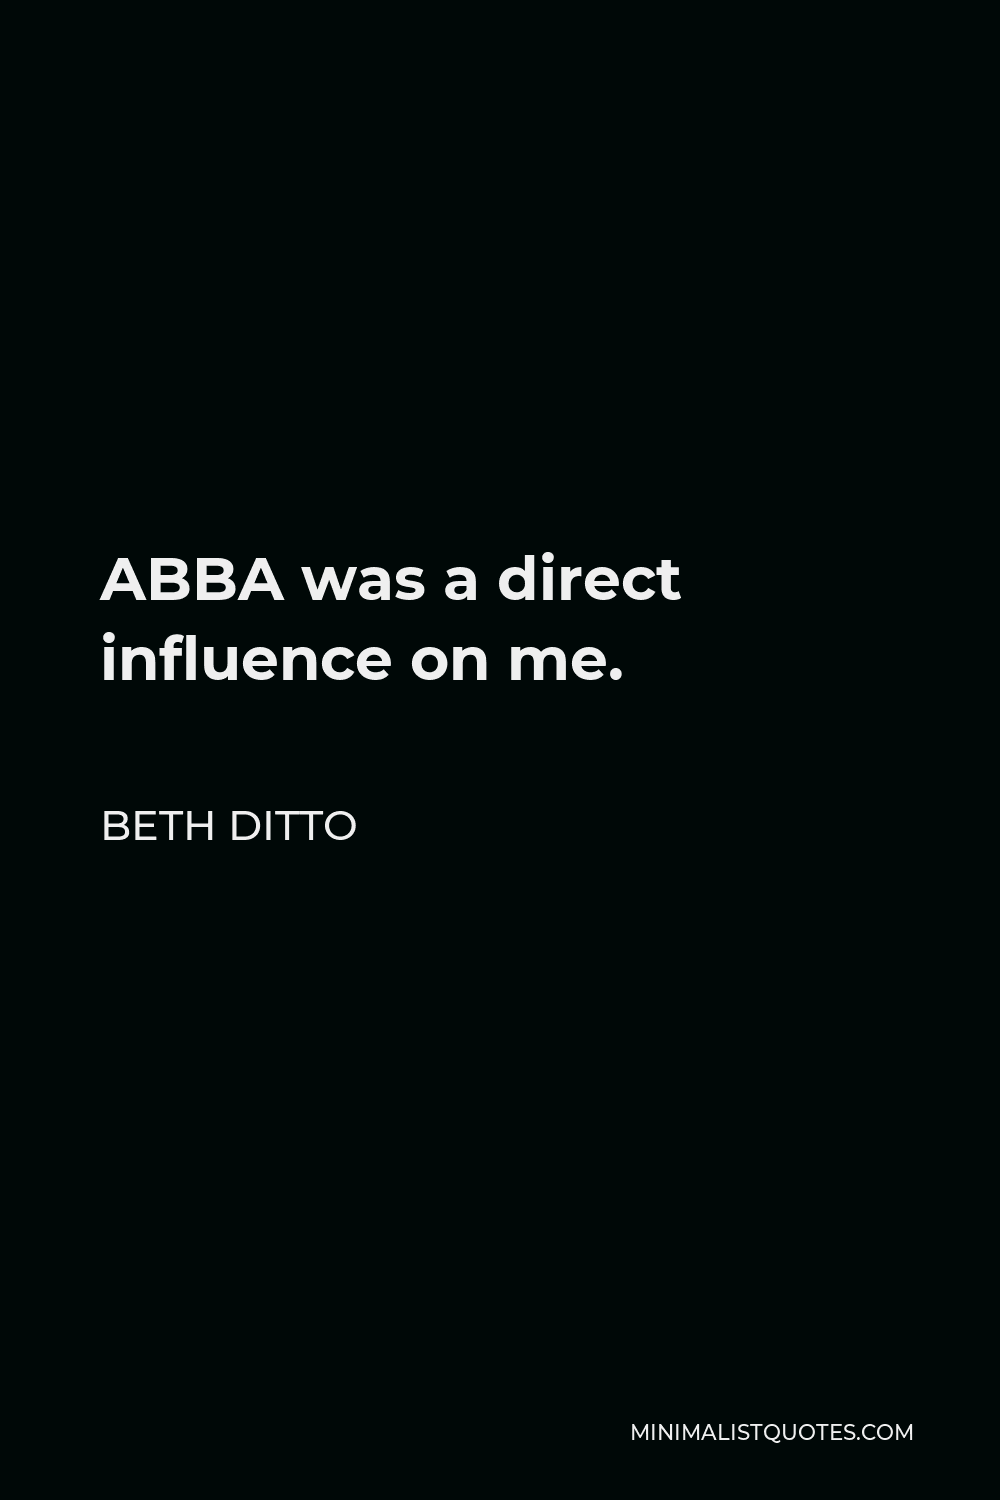 Beth Ditto Quote - ABBA was a direct influence on me.